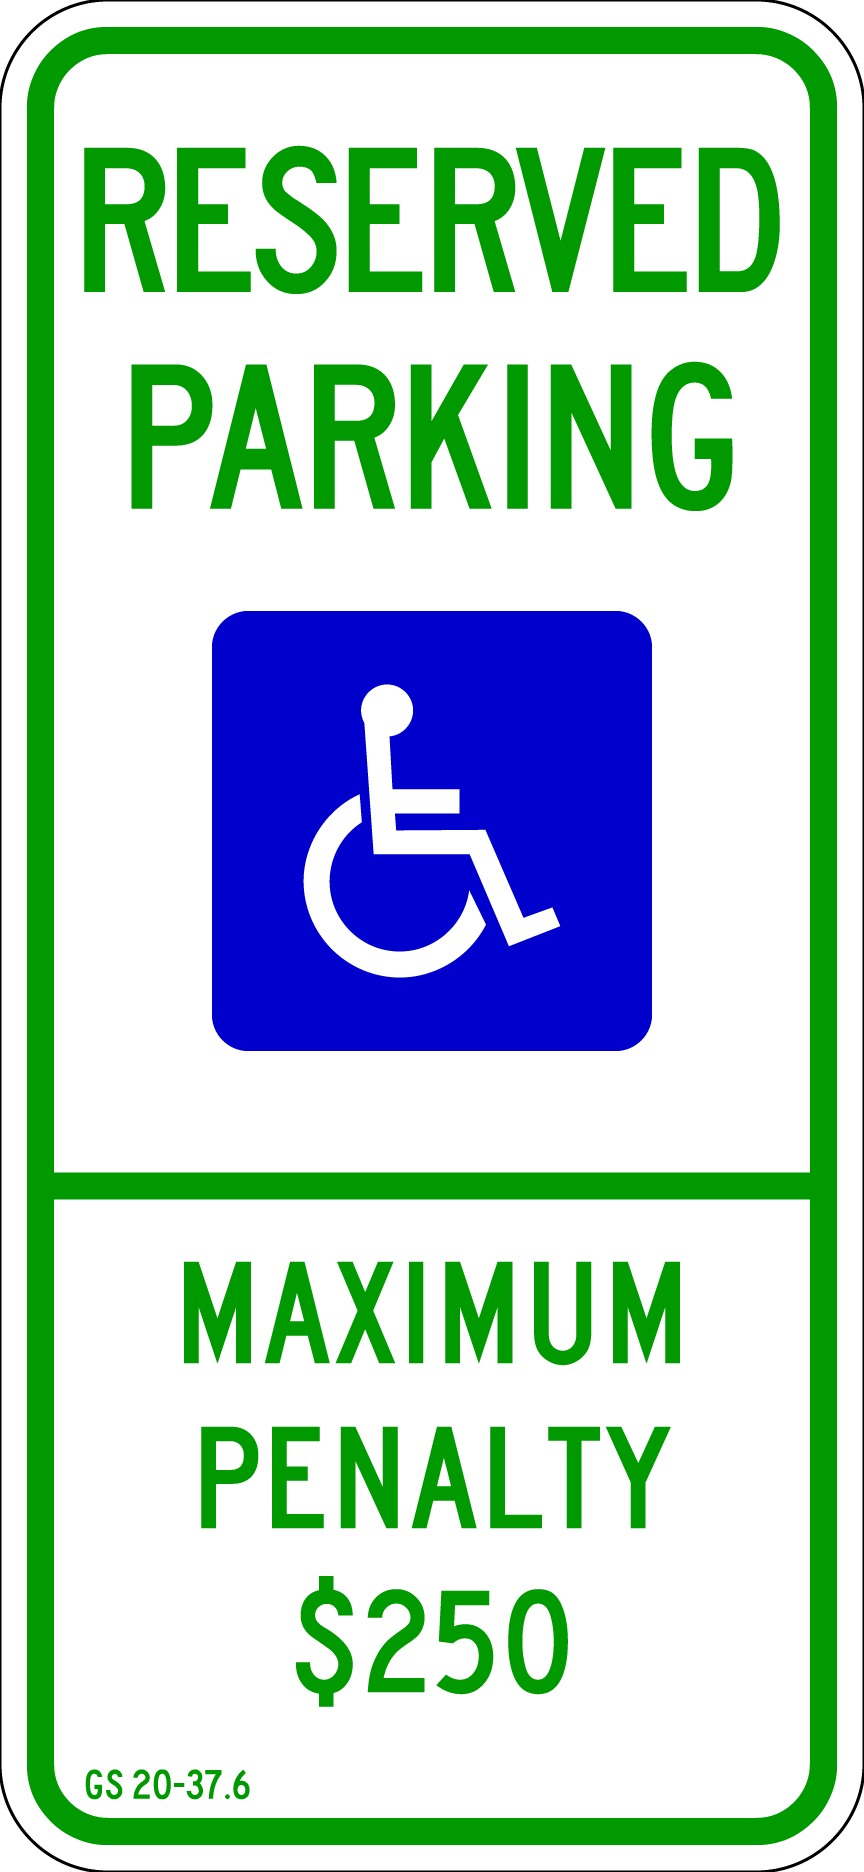 NC Reserved Handicap Max Penalty Metal Sign, Reflective/Non, 12 x 26, Holes, Overlaminate Y/N, Quality Materials, Long Life - PHC-1002